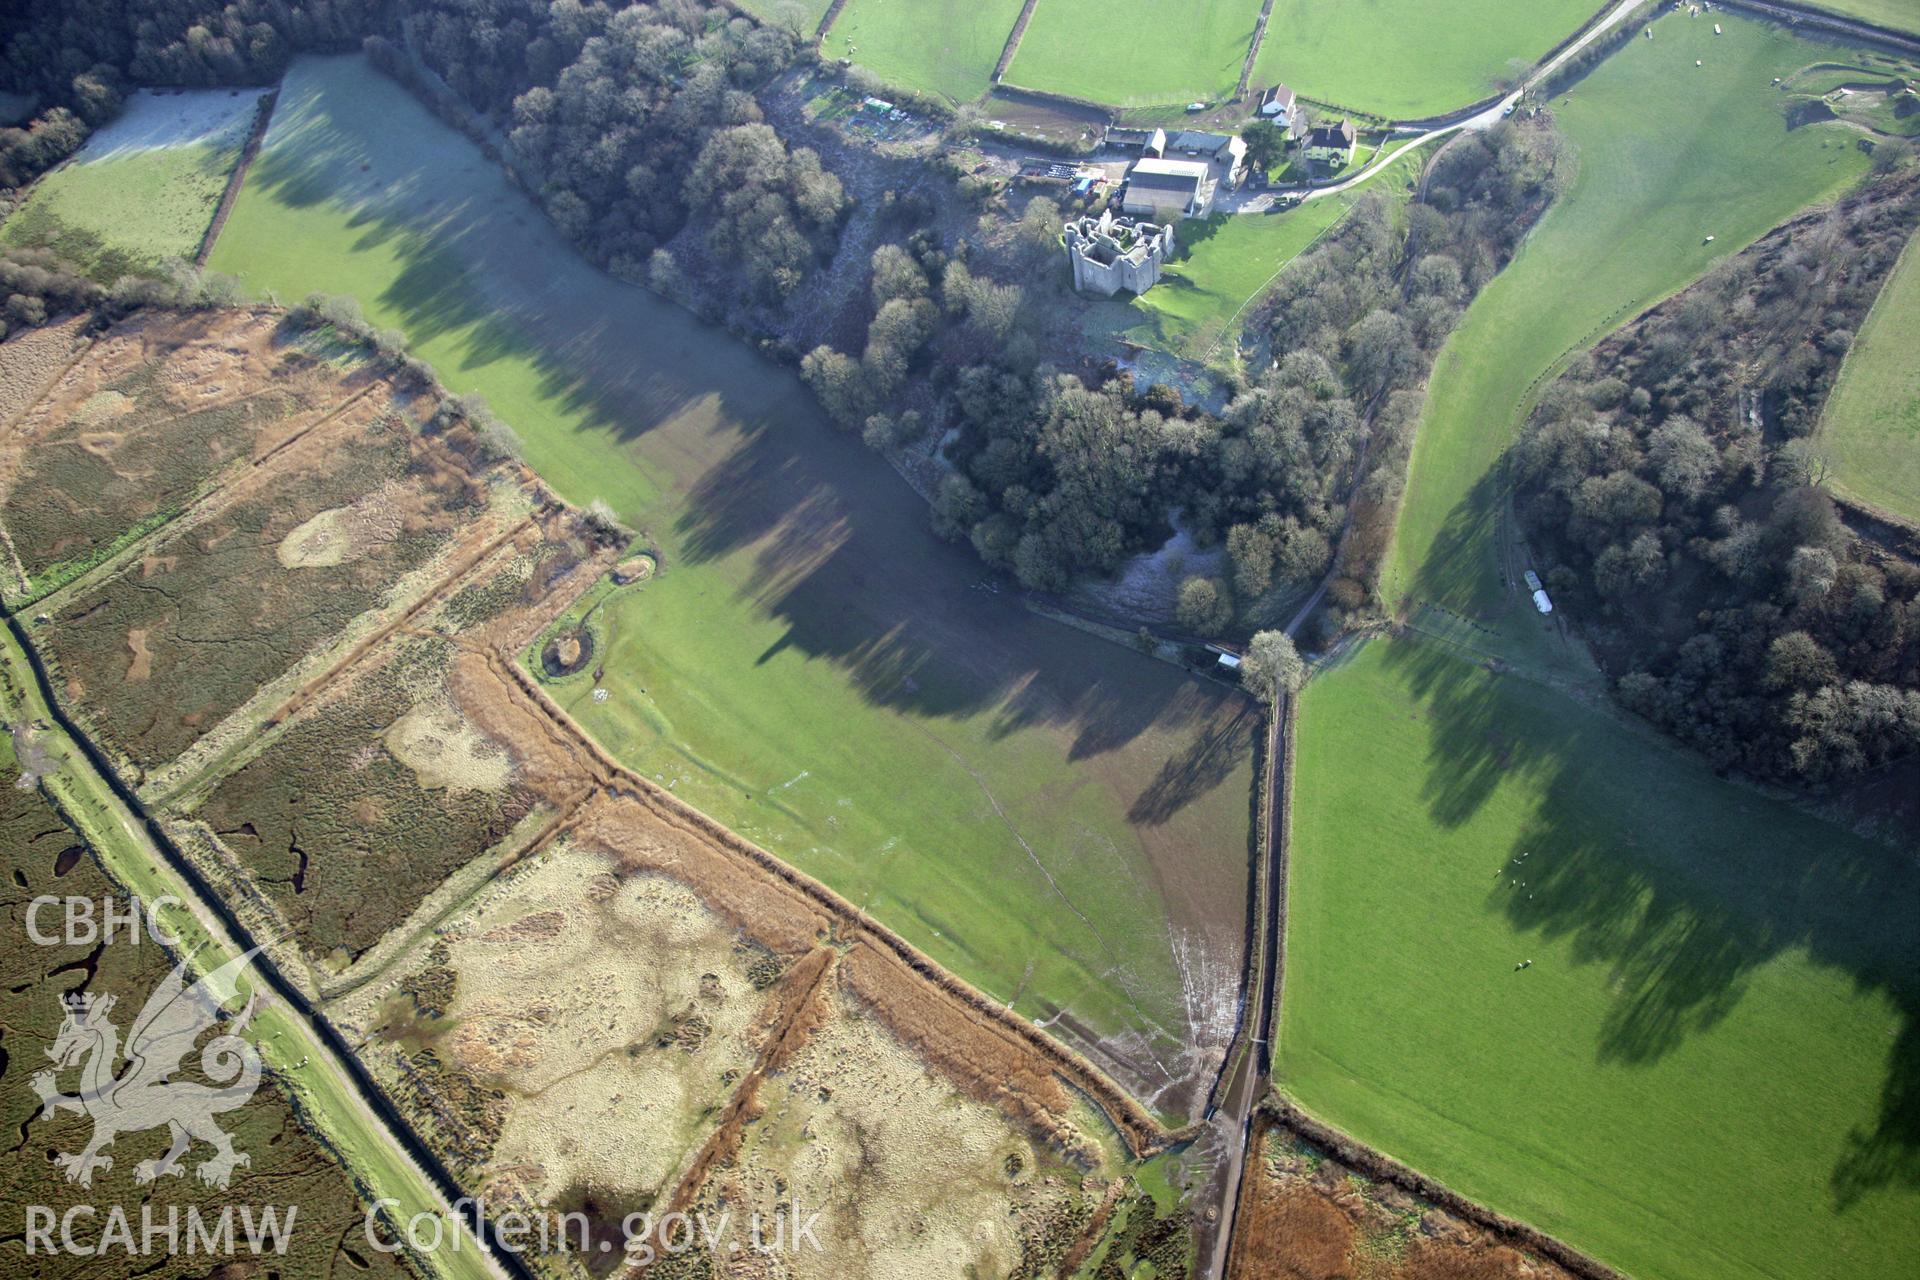 RCAHMW colour oblique photograph of Woebly Castle, Earthworks West Of Castle. Taken by Toby Driver on 02/02/2012.